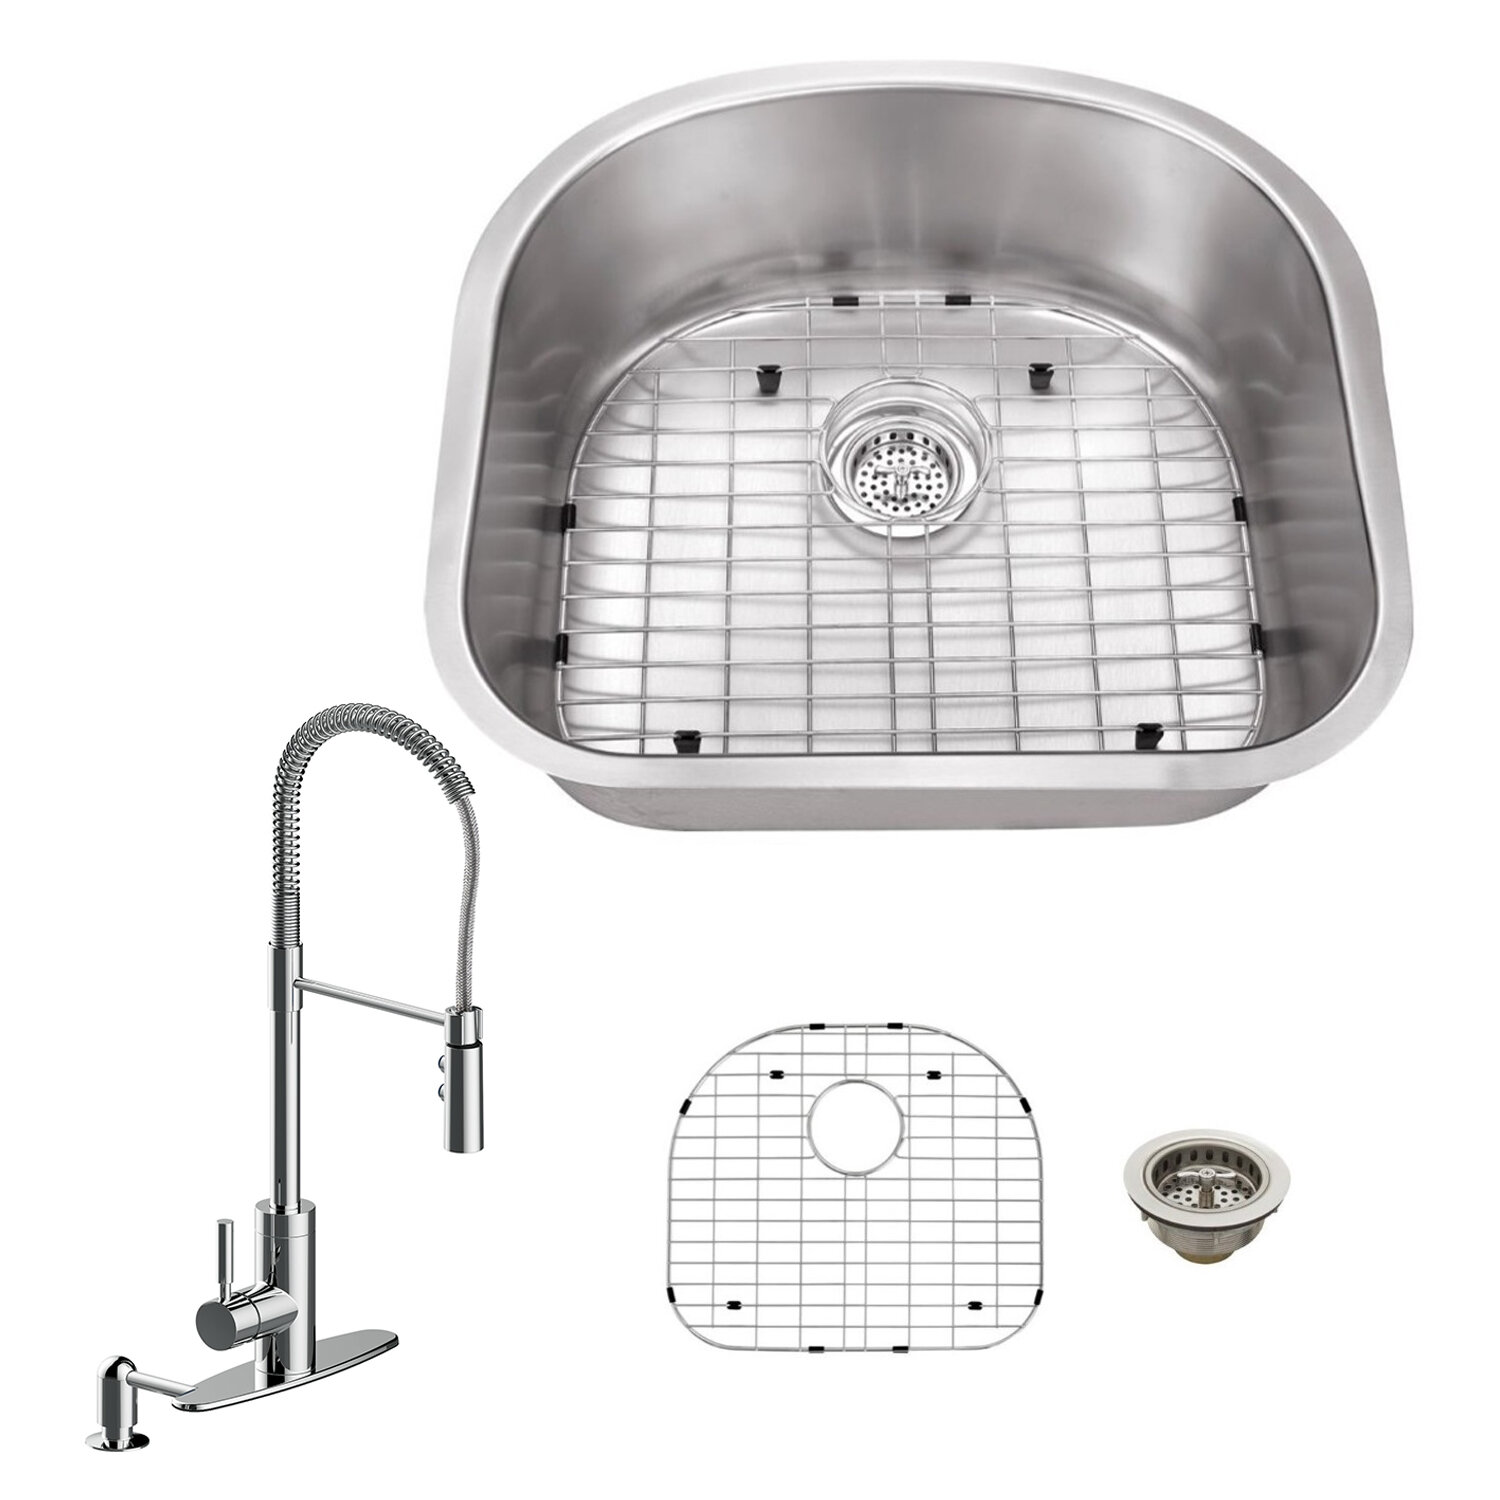 18 Gauge Stainless Steel 23 25 L X 20 88 W Undermount Kitchen Sink With Pull Out Faucet And Soap Dispenser